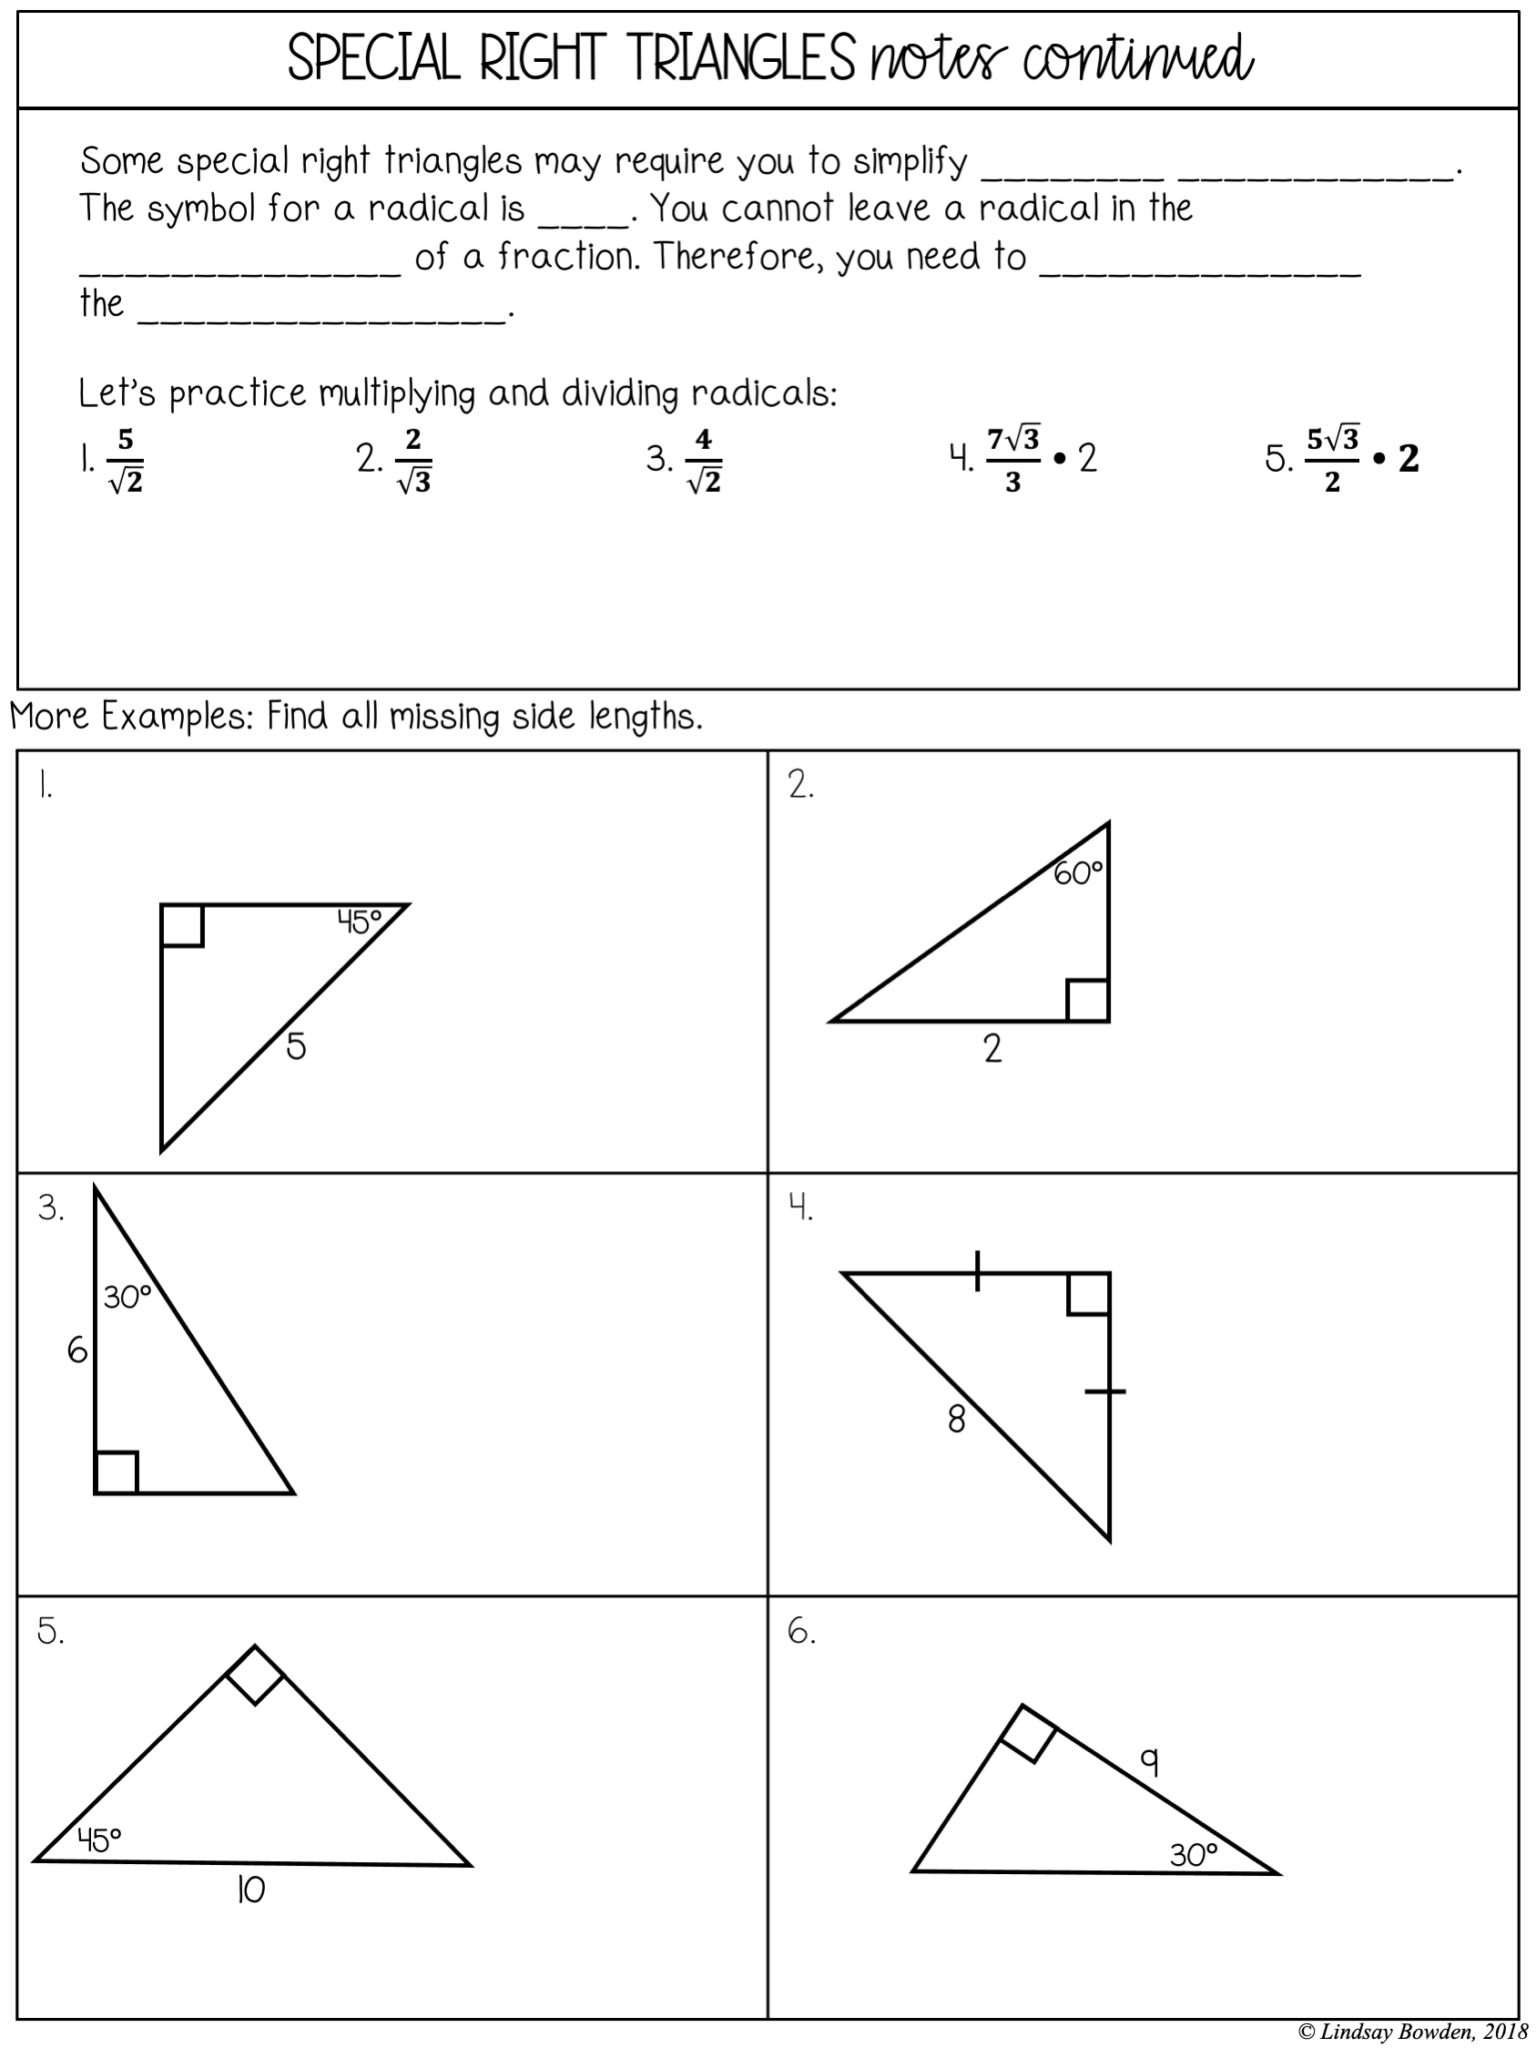 special-right-triangles-notes-and-worksheets-lindsay-bowden